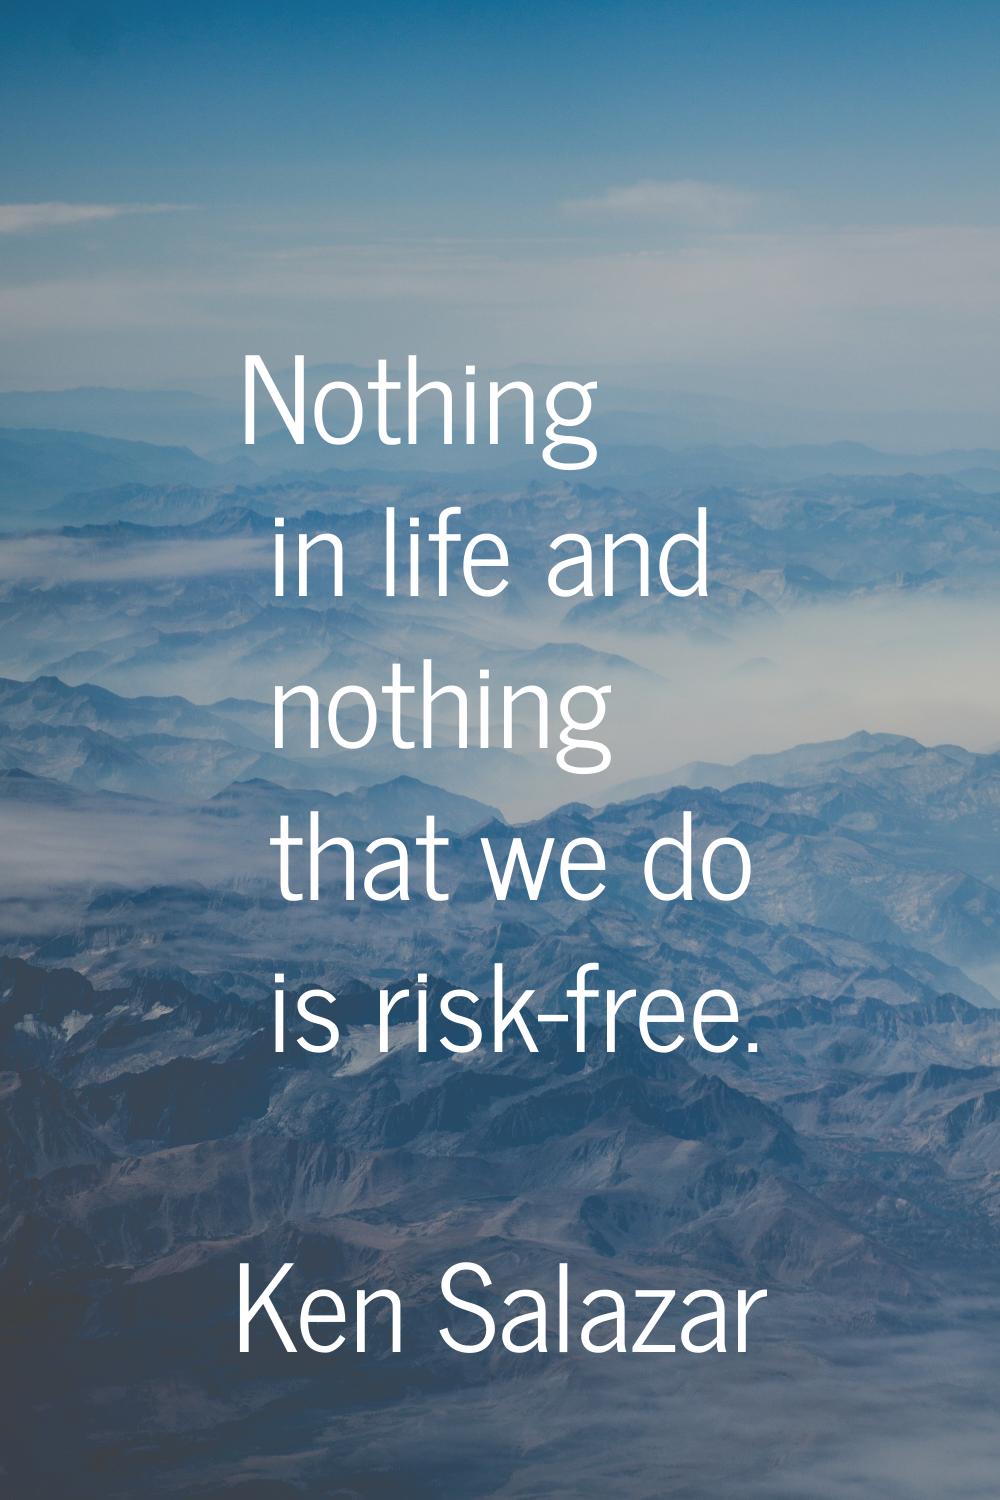 Nothing in life and nothing that we do is risk-free.